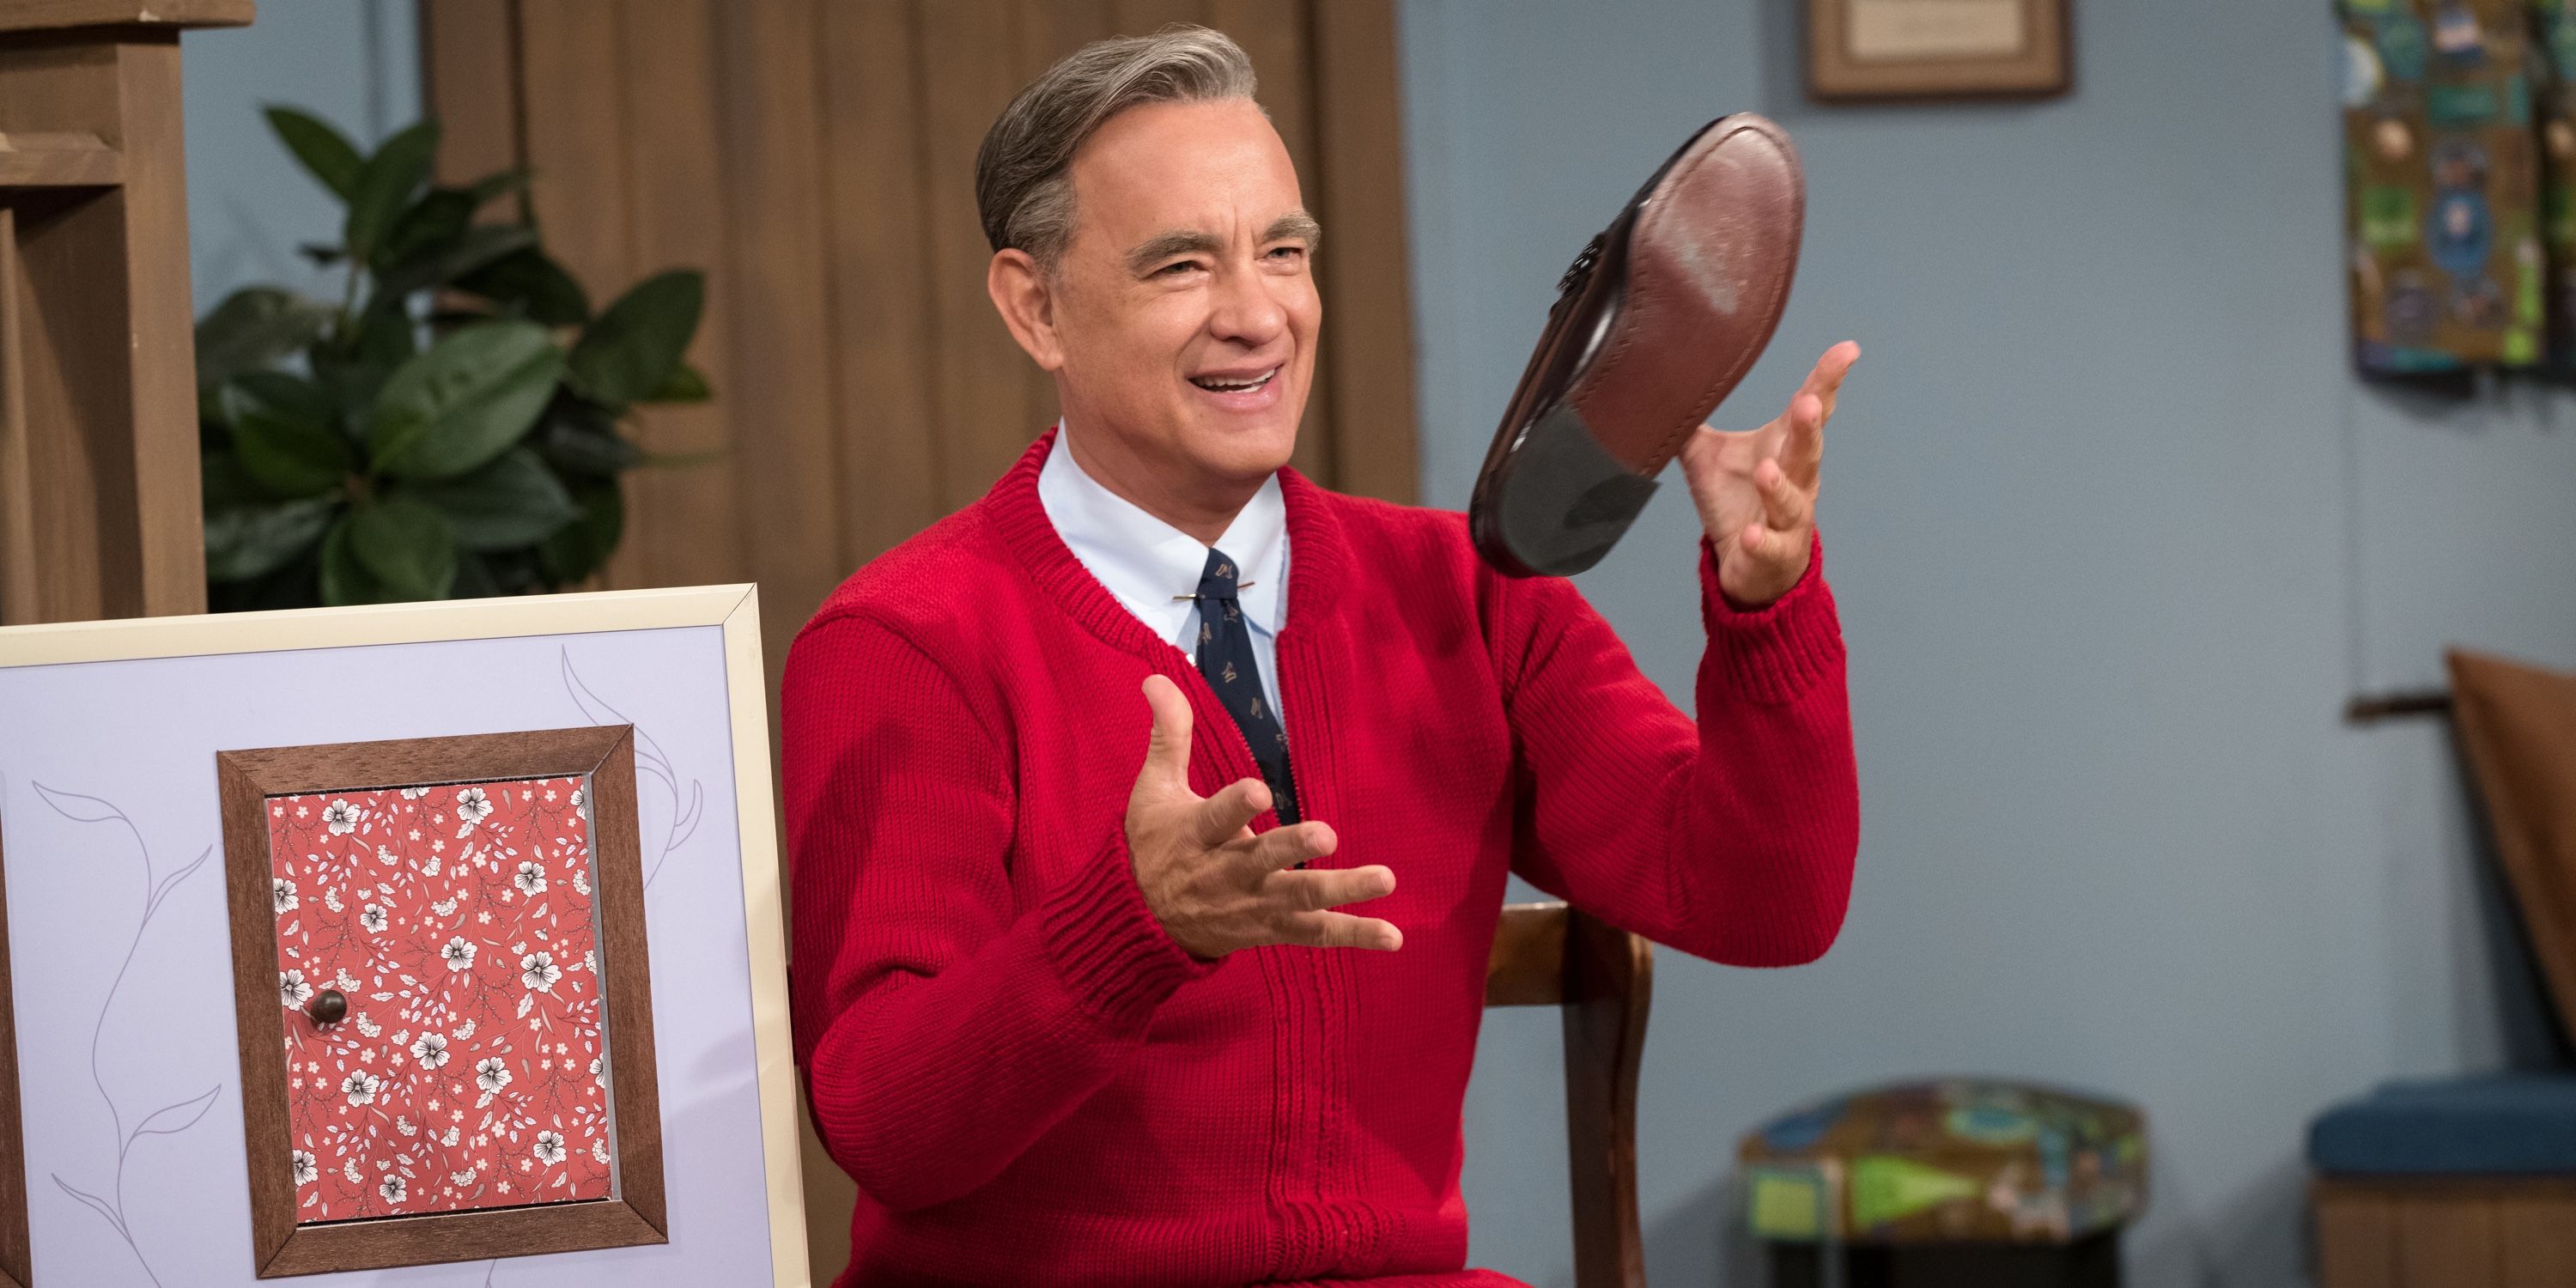 Tom Hanks as Fred Rogers in A Beautiful Day in the Neighborhood cropped